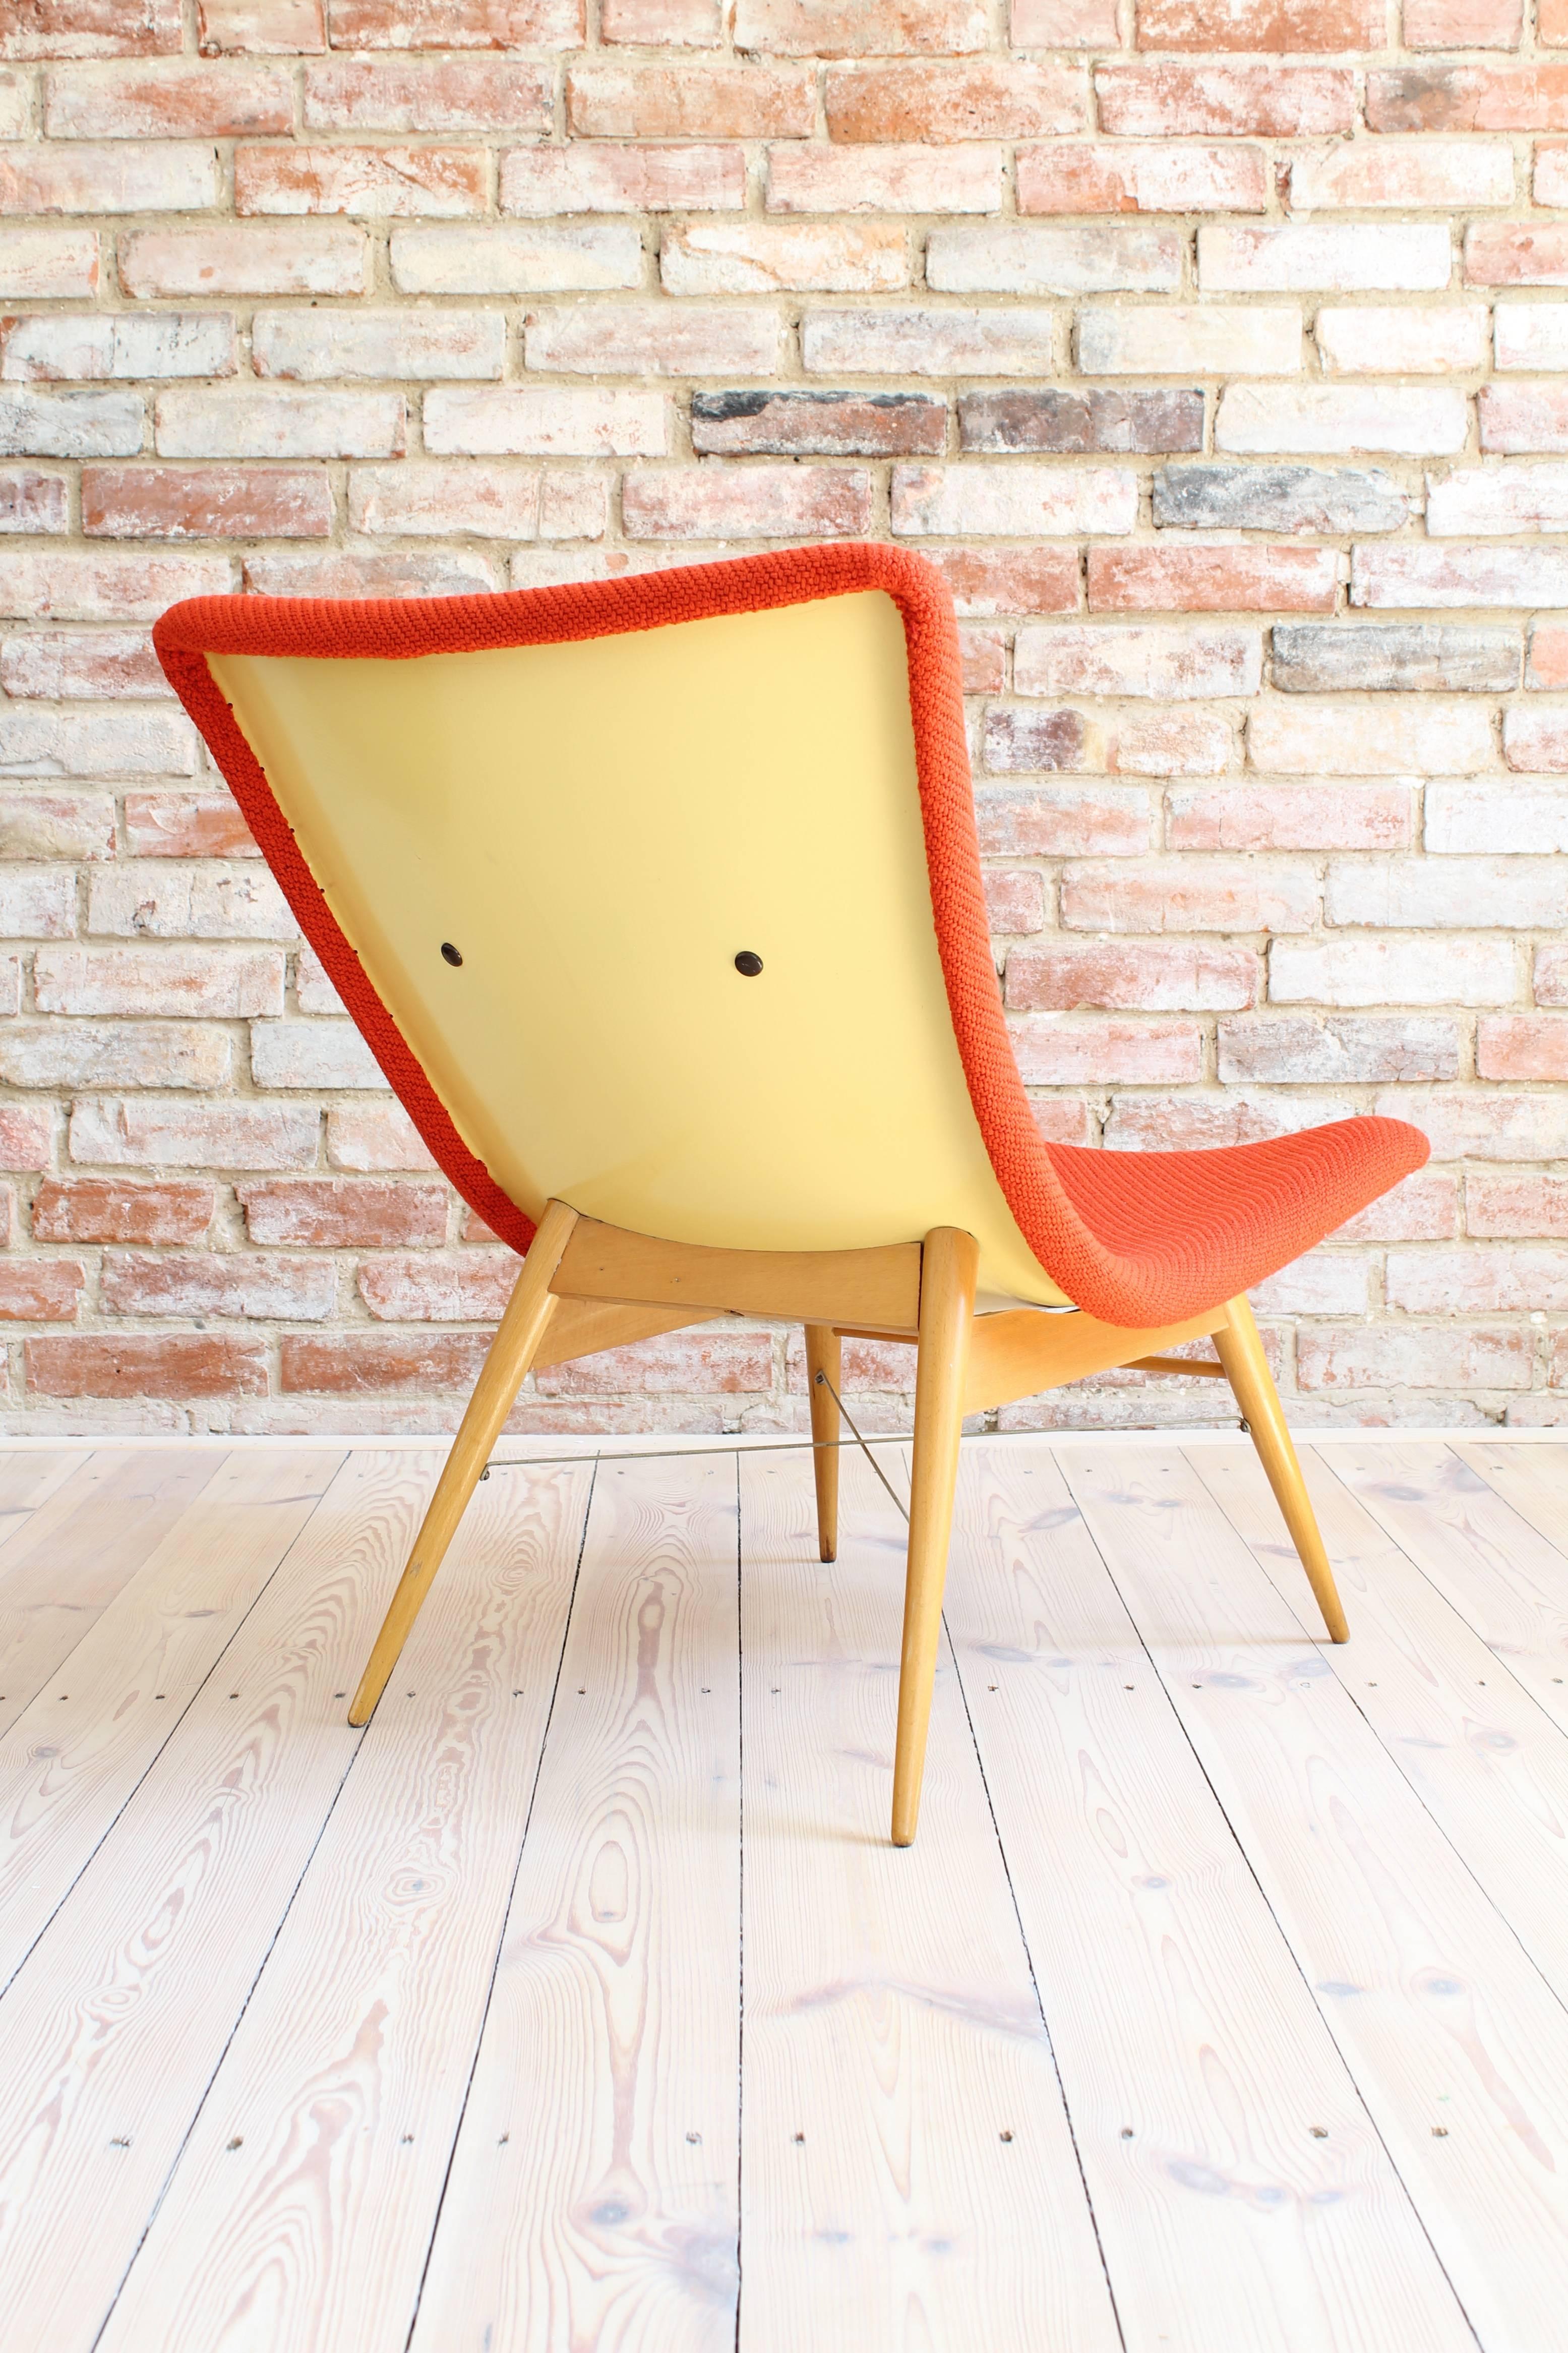 20th Century Lounge Chair by Miroslav Navratil, 1959, Reupholstered in Red Kvadrat Fabric